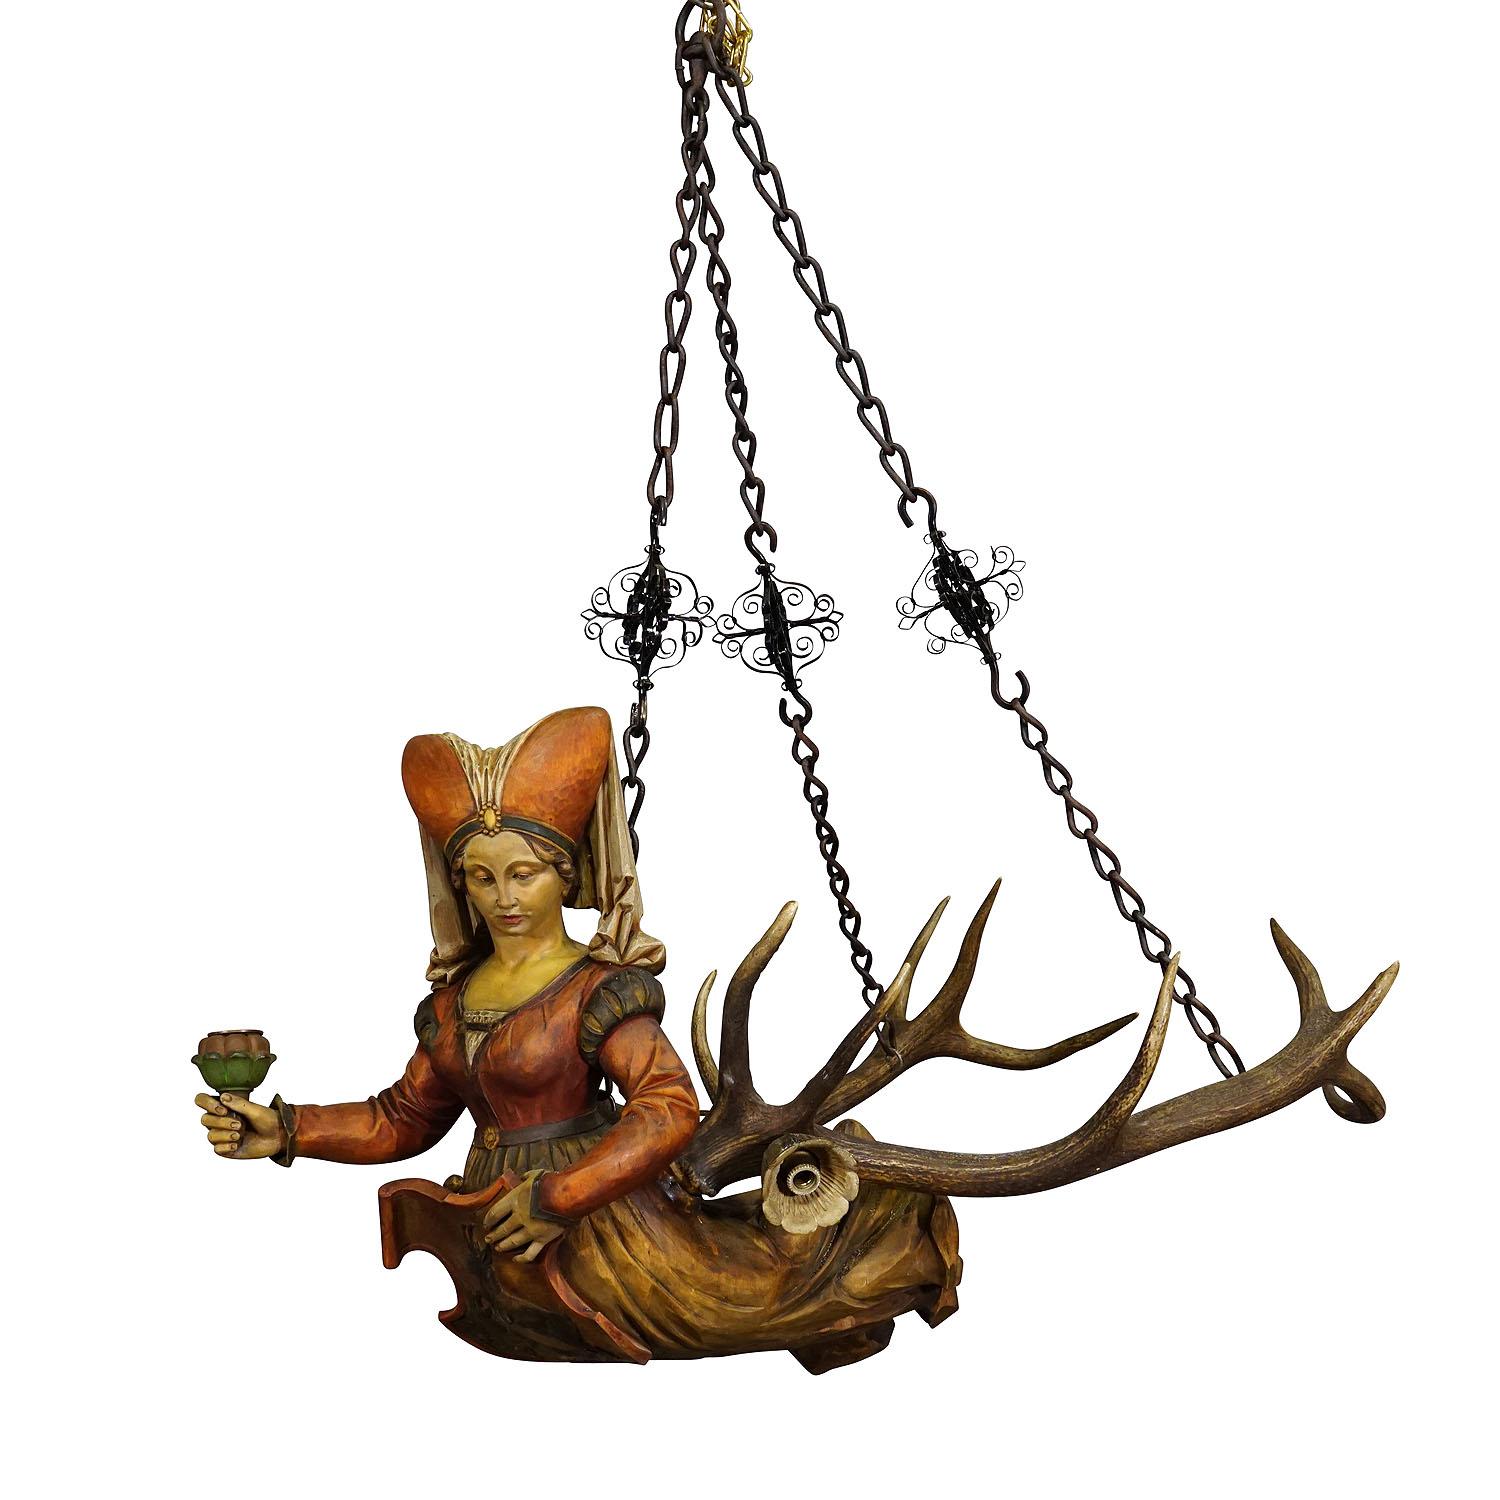 Antique Lusterweibchen of a Medieval Noble Lady ca. 1880s

A great antique chandelier featuring a medieval noble lady holding a heraldic blazon. The sculpture is made of handcarved and painted wood and mounted on a large pair of deer antlers. It